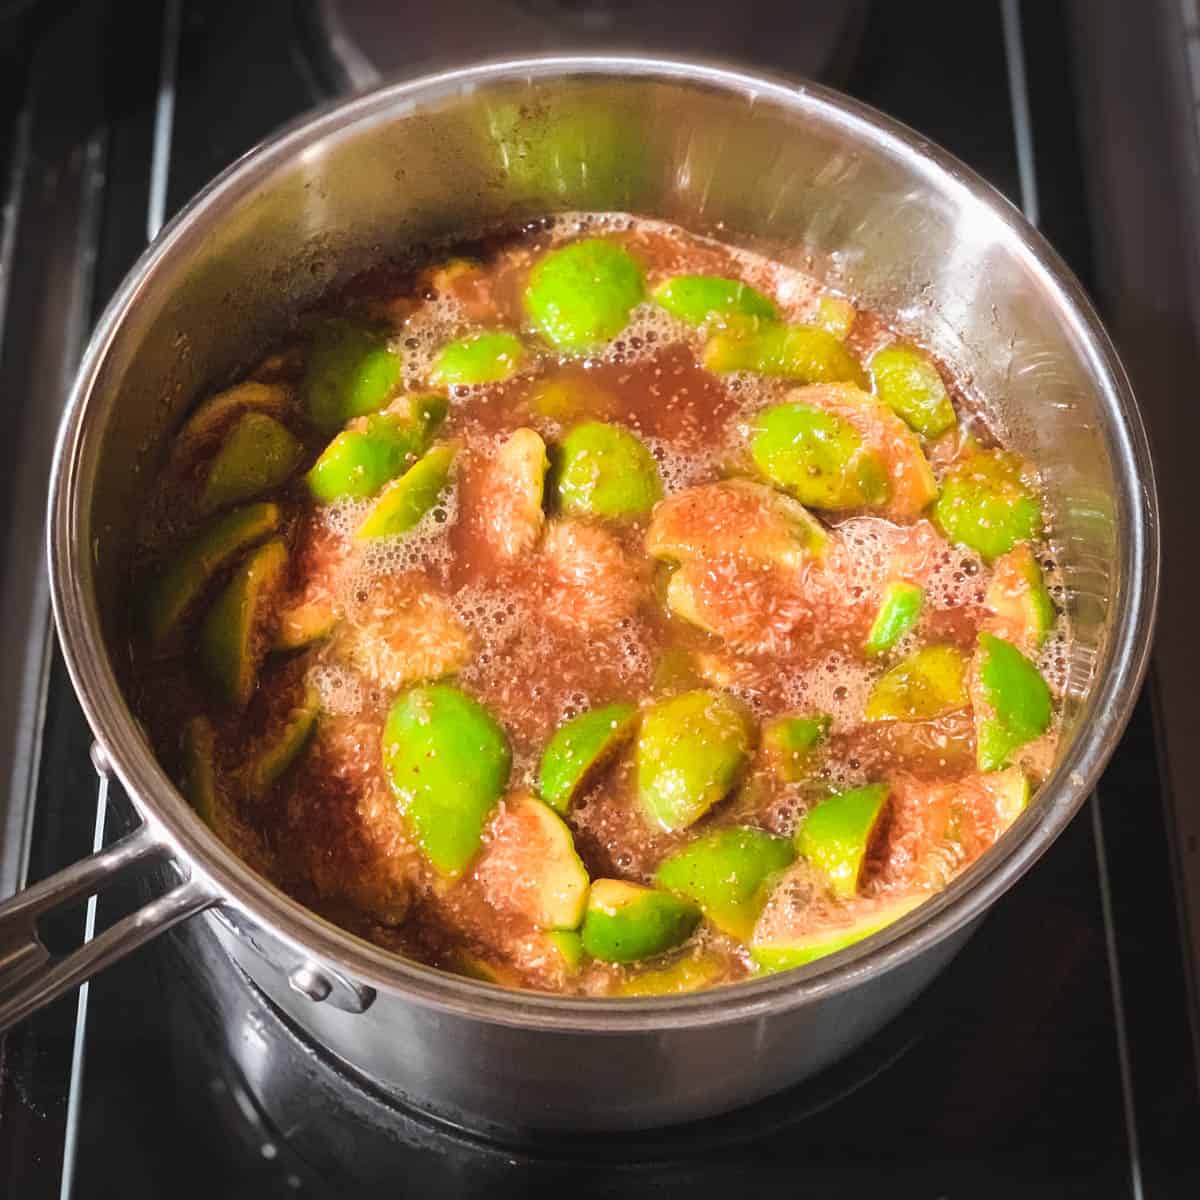 figs cooking in a pot on the stove